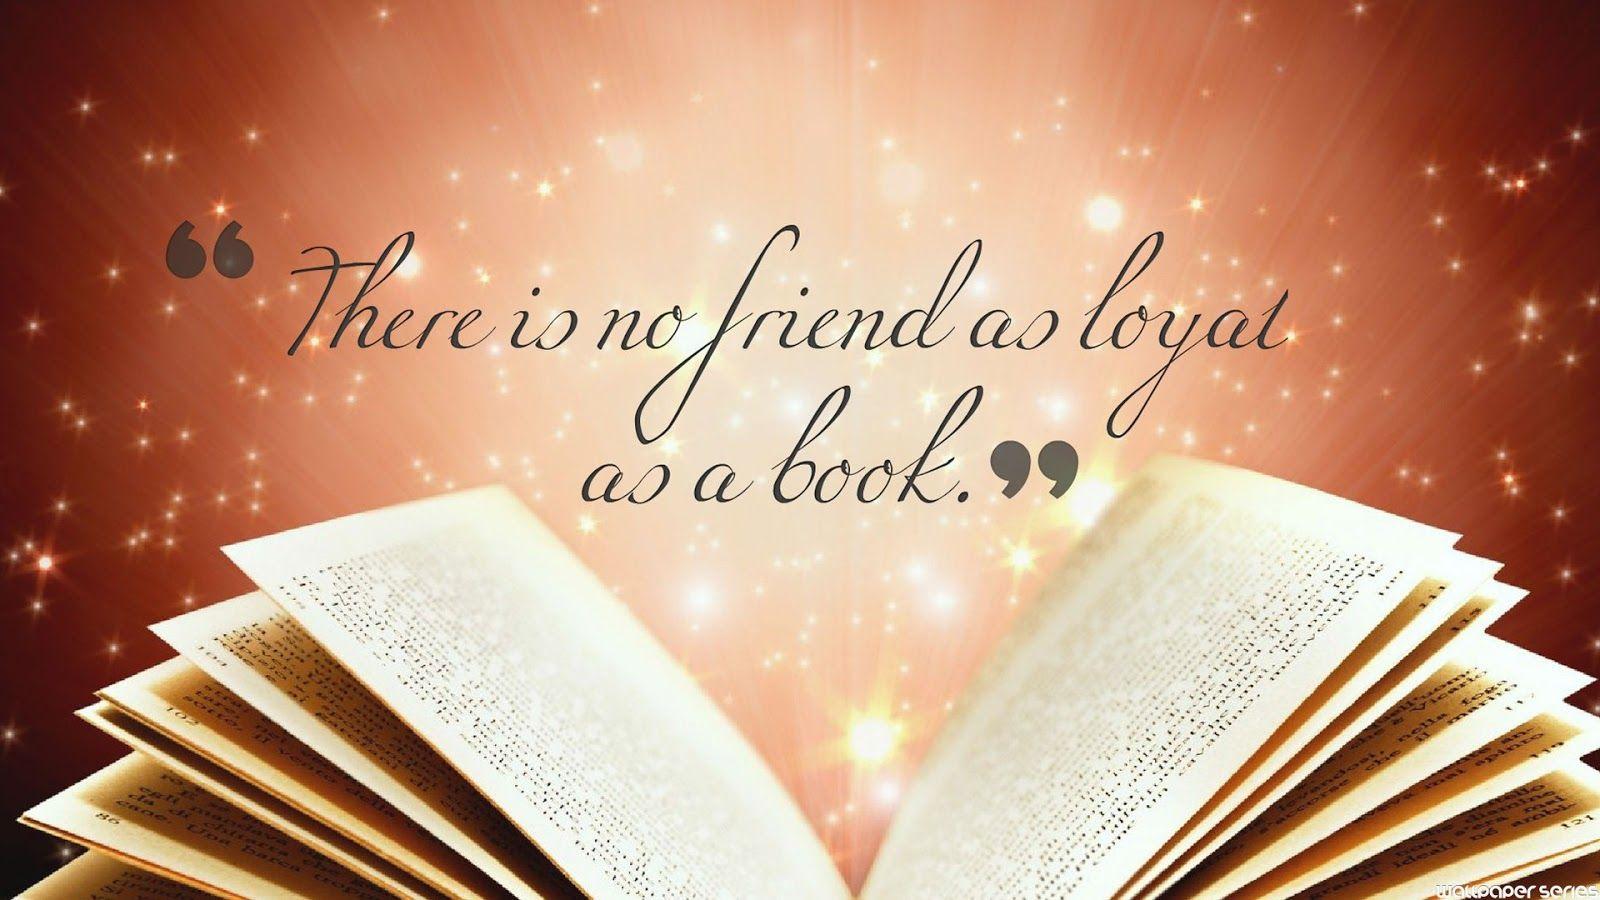 Book Lover Quotes Wallpapers - Wallpaper Cave